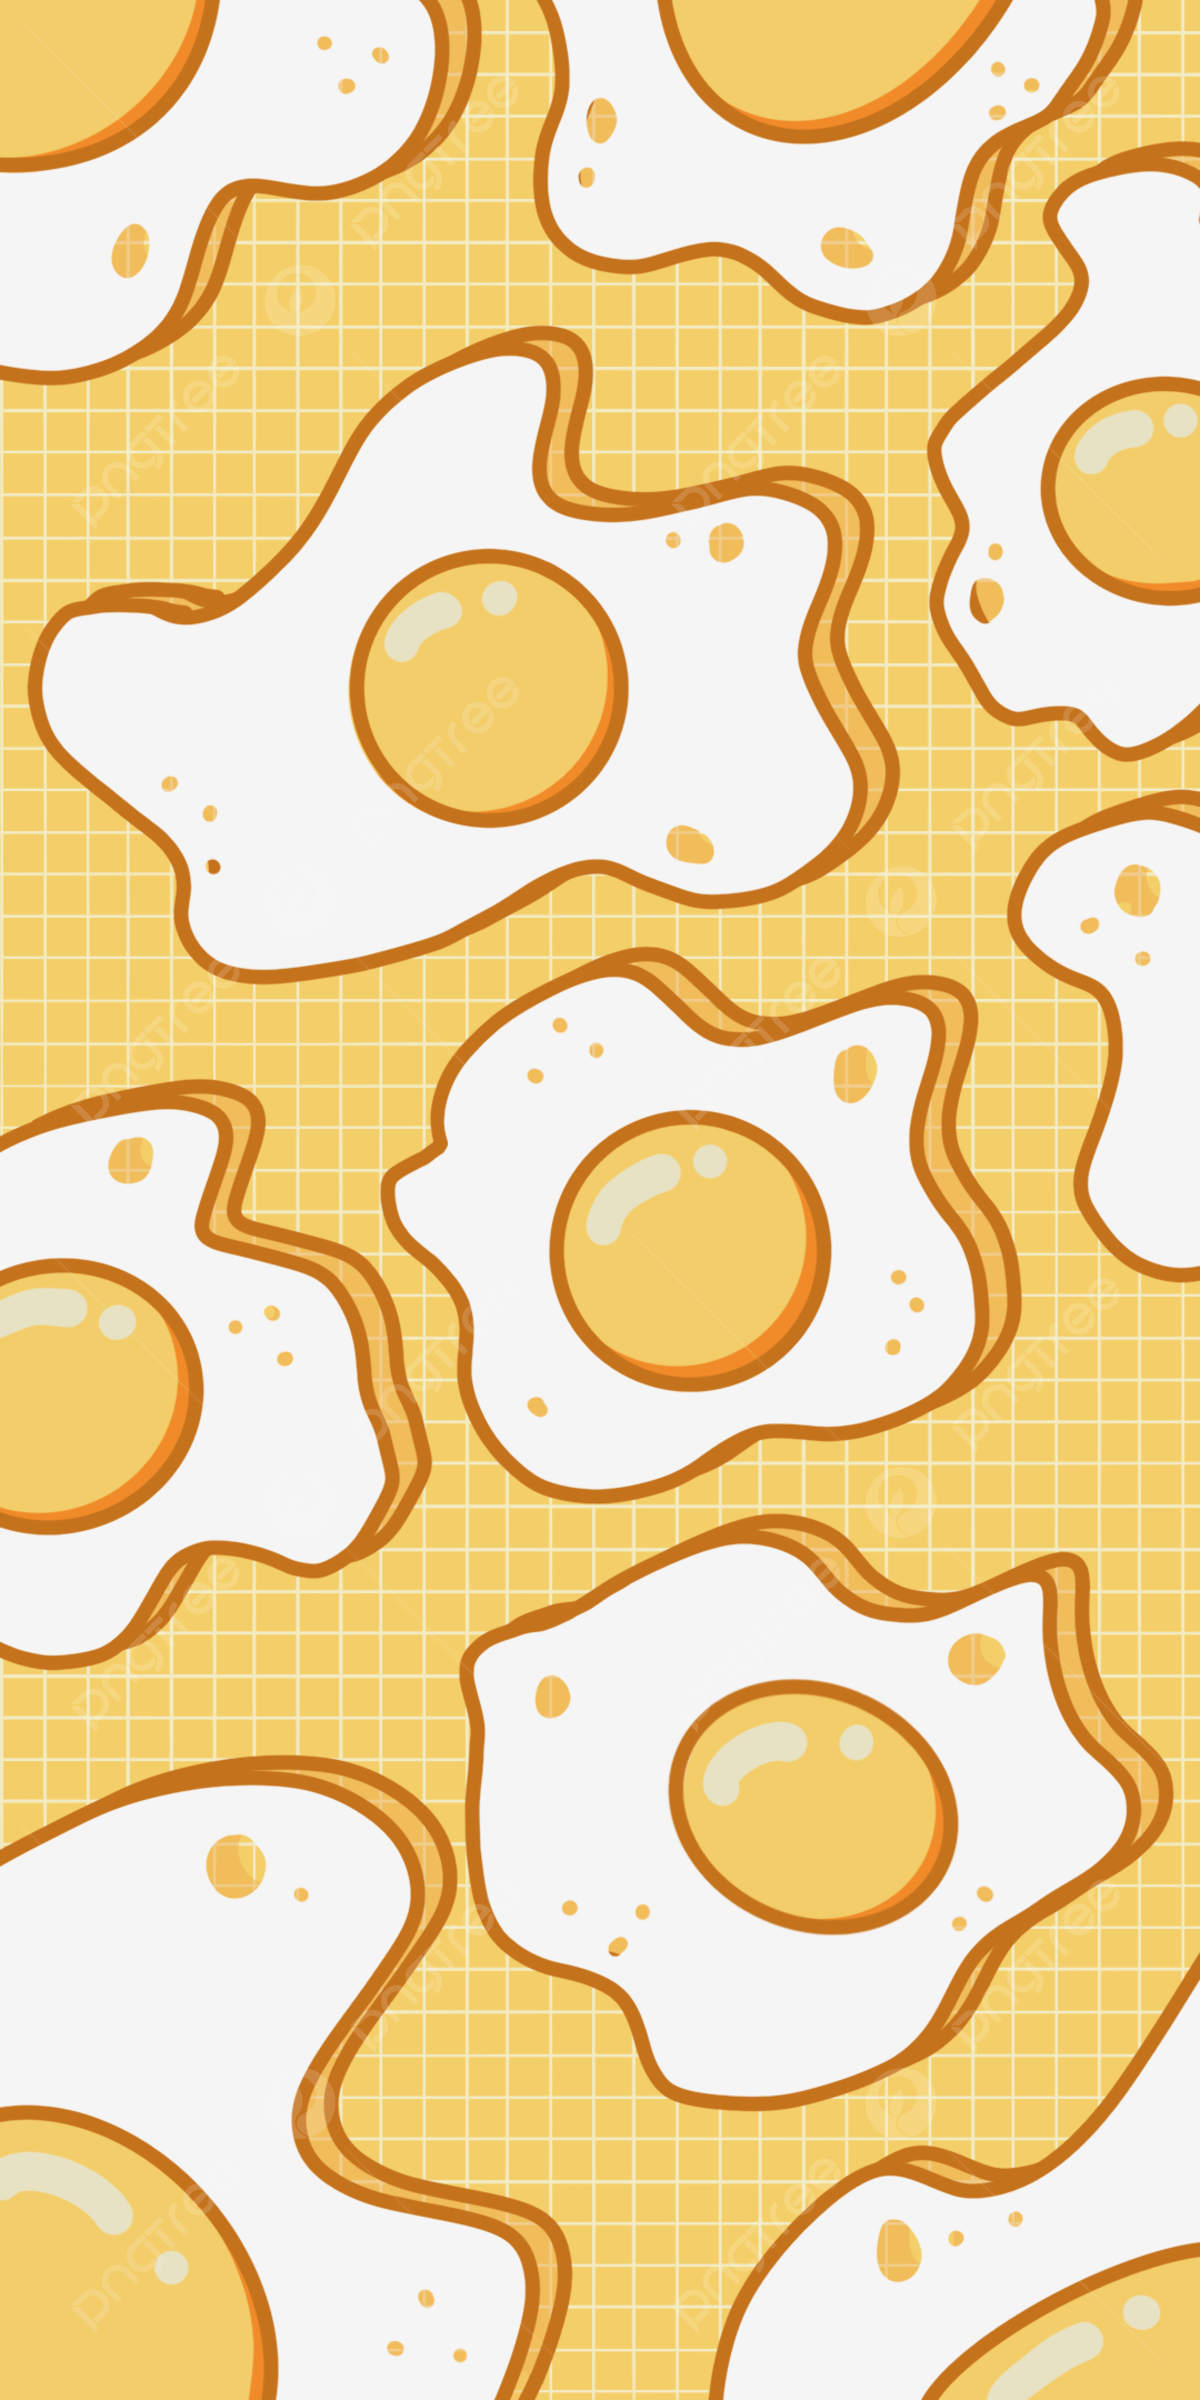 A pattern of eggs on yellow paper - Egg